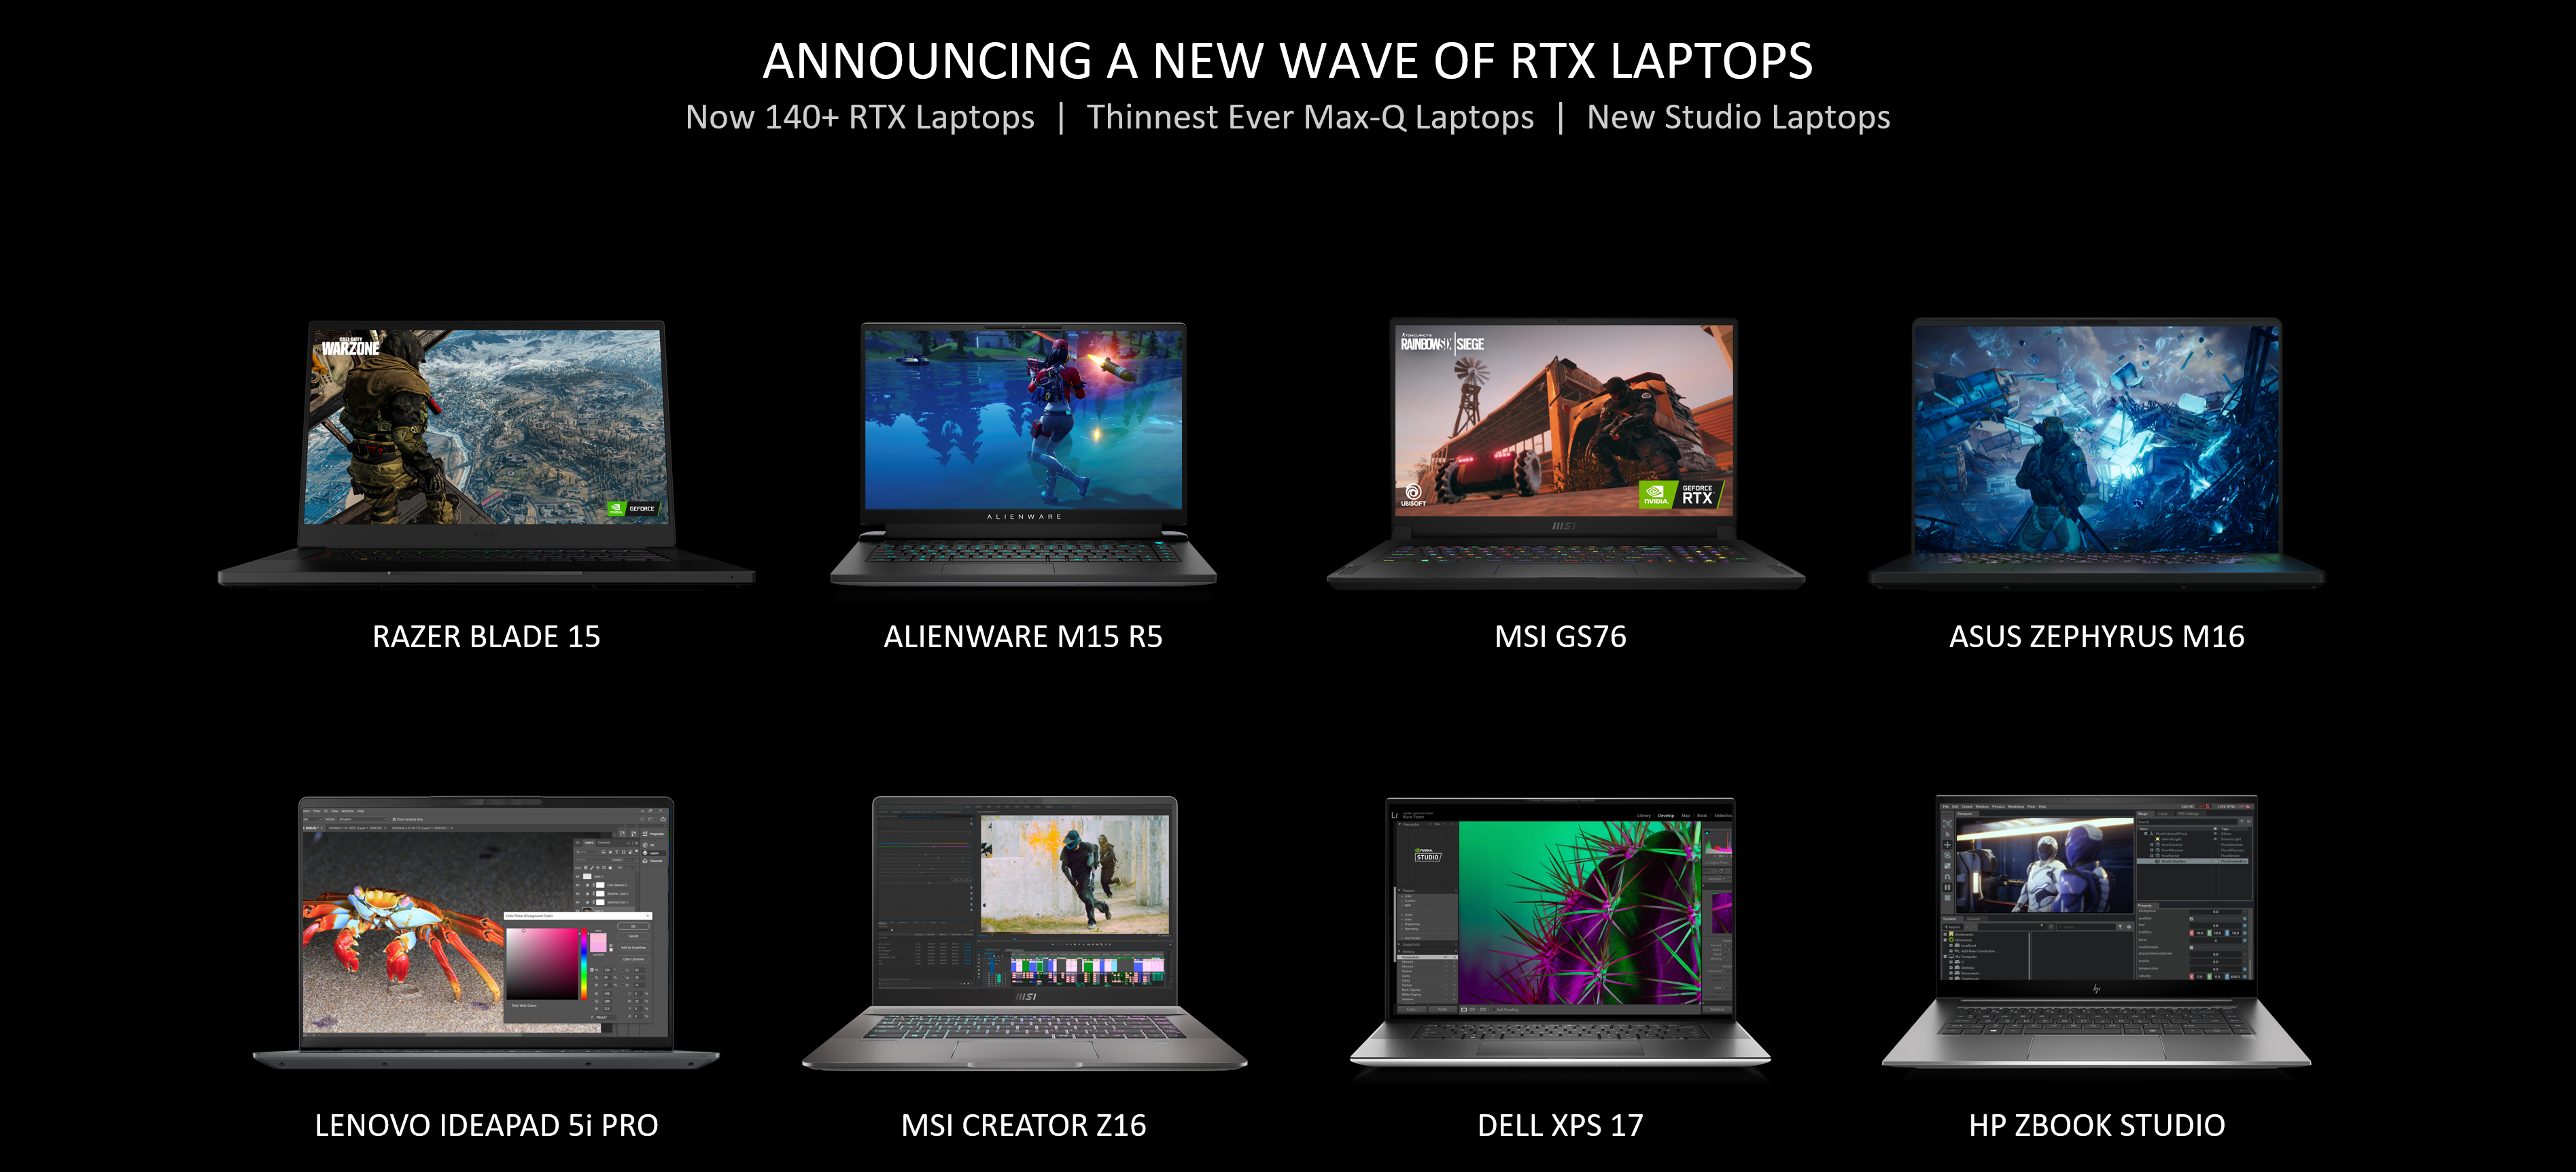 NVIDIA GeForce RTX 40 Series Laptop GPUs Increase SOLIDWORKS Performance  for Students